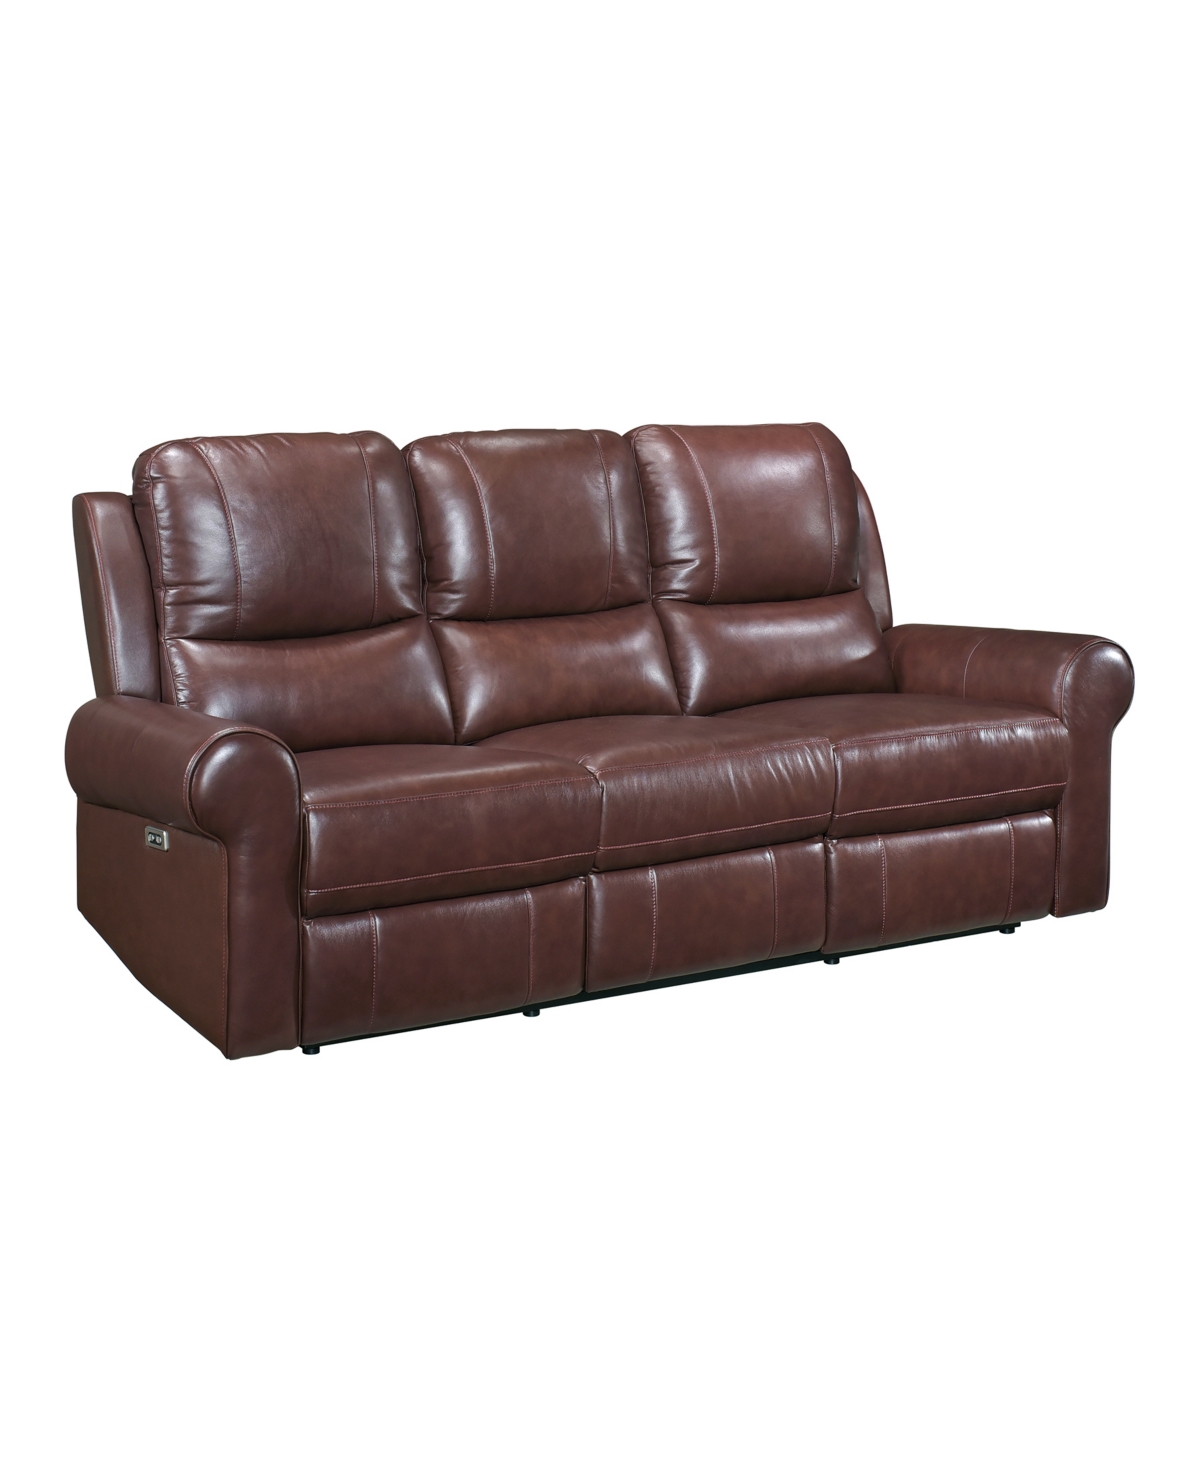 Homelegance White Label Florentina 82" Leather Match Power With Power Headrests Double Reclining Sofa In Brown